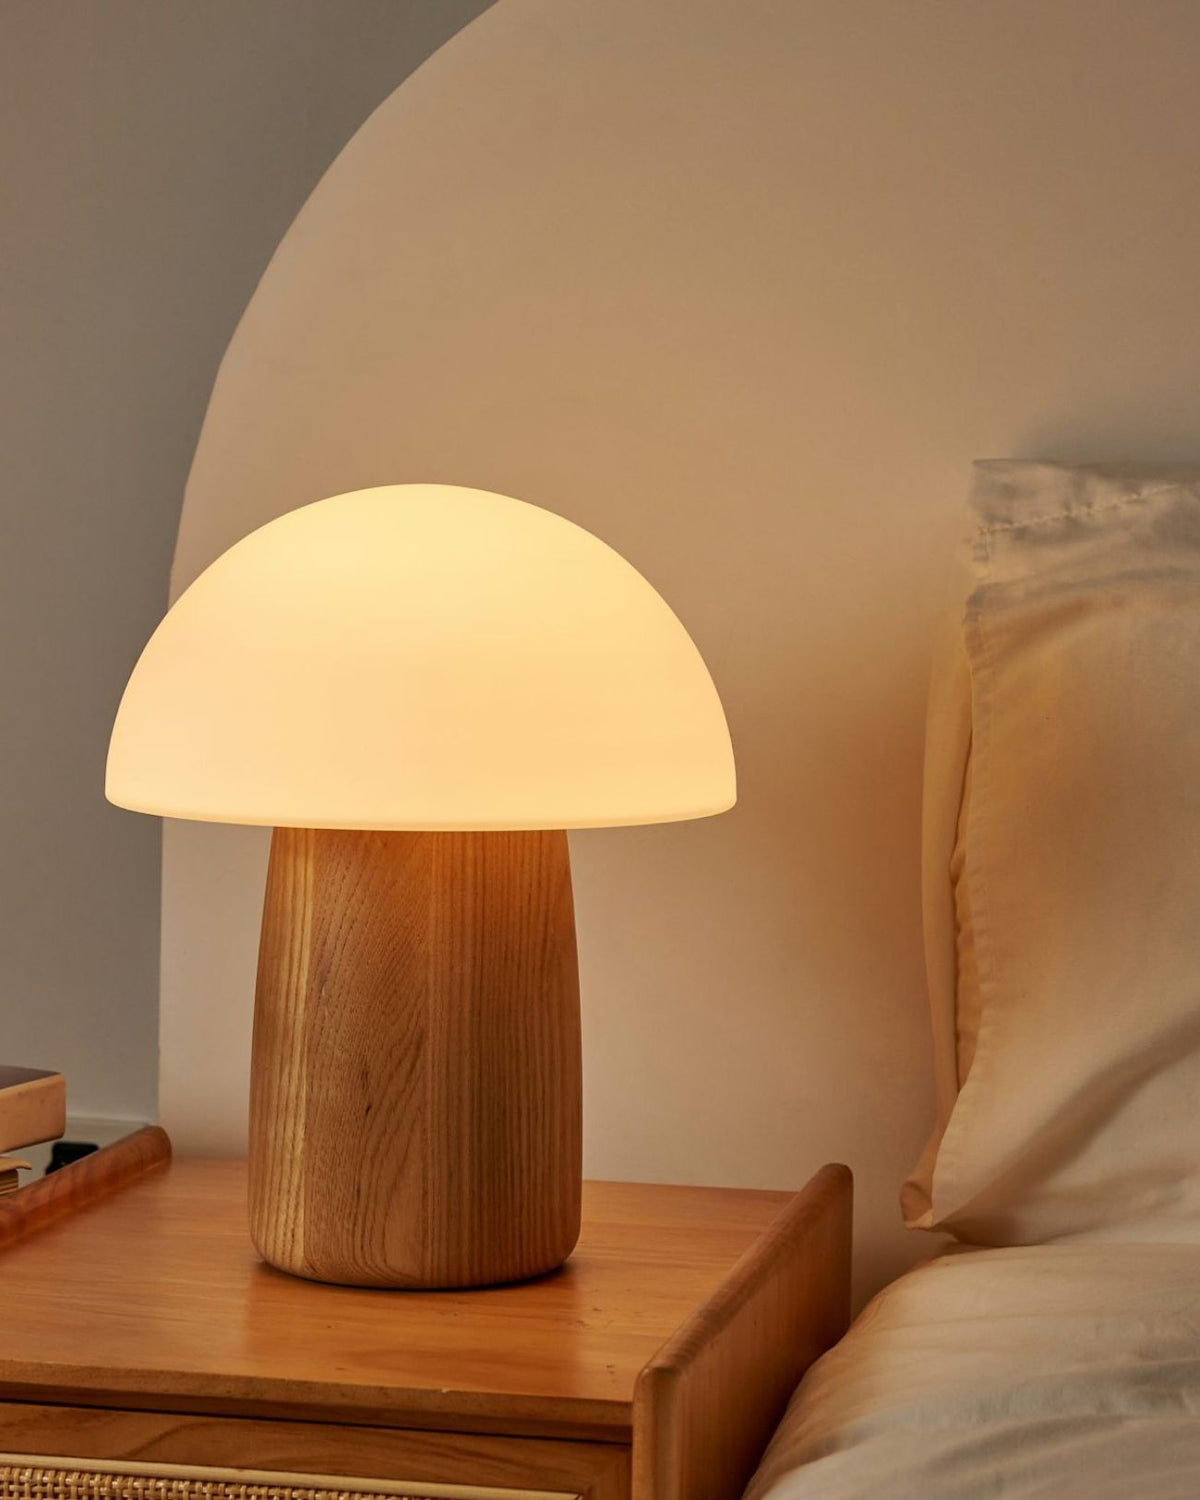 The Alice Mushroom Lamp can light up your kid's space with vibrant and vivid colours, or set a relaxing mood with soft, muted tones.  This portable lamp is White Ash Wood or Natural Walnut Wood with a frosted, milky white glass shade. You can recharge it through the USB-C port in the back in no time.  Switch between 7 soft RGB lights and the warm white light mode with a gentle tap on the mushroom glass shade or simply keep tapping until you find your favourite colour to suit your kid's mood!